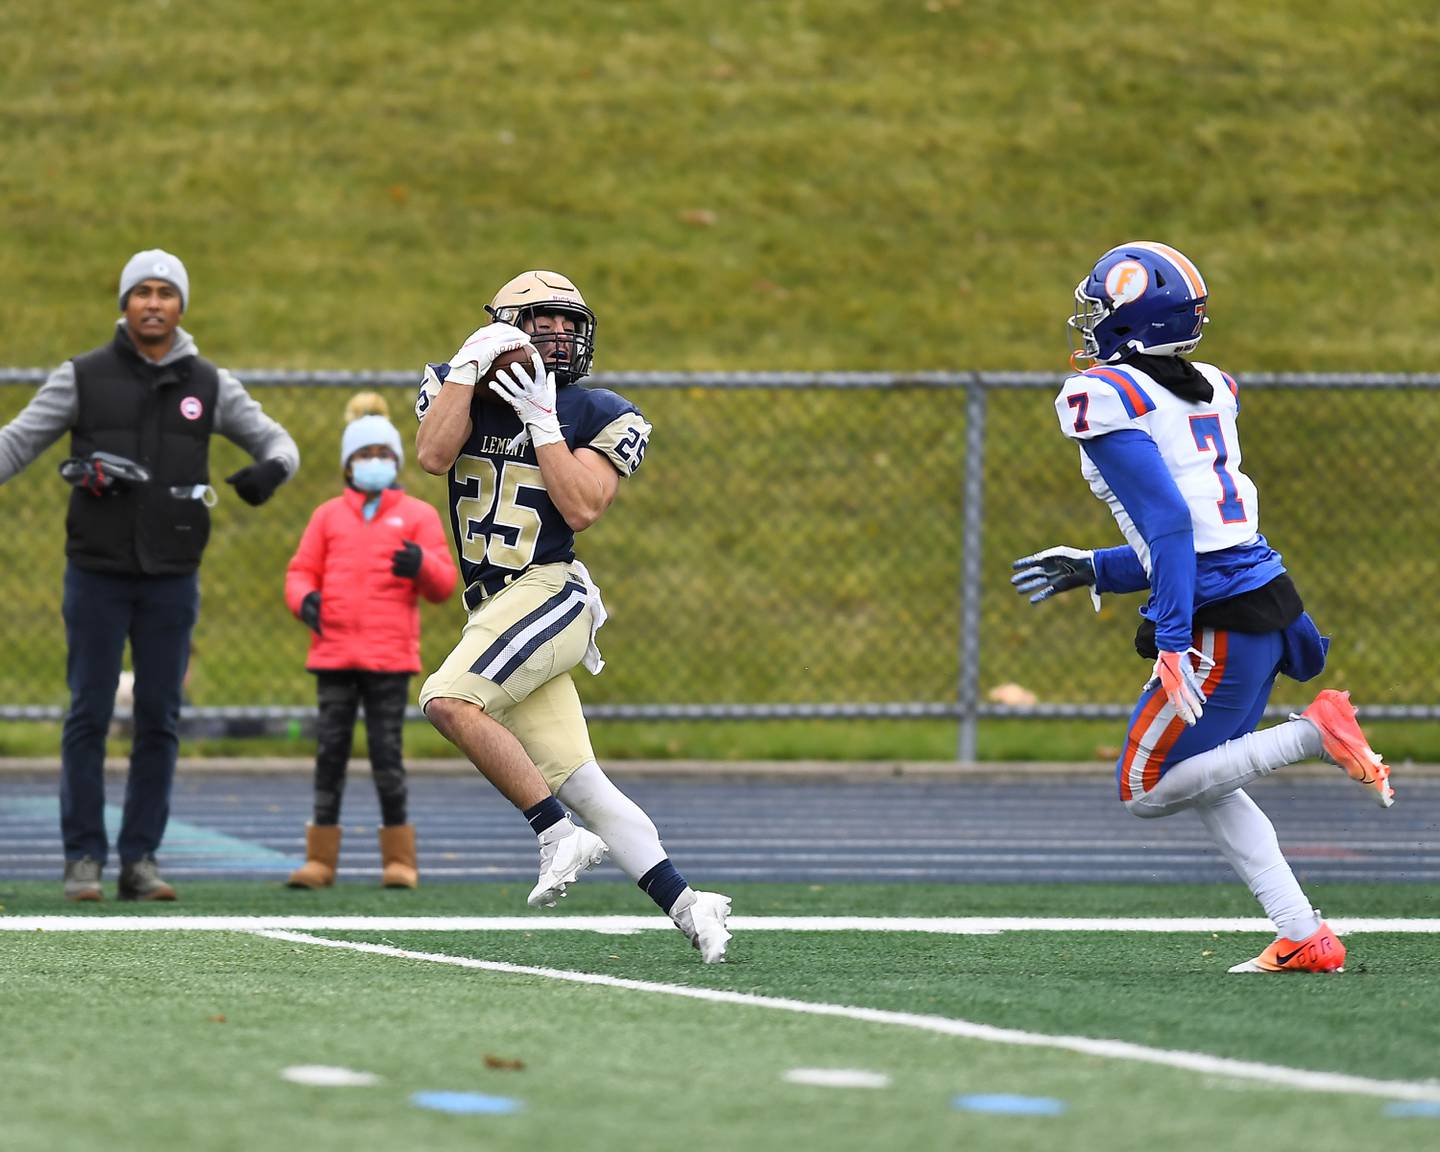 Lemont's Sam Andreottie (25) catches a pass during Class 6A quarterfinal playoff game on Saturday, Nov. 13, 2021, at Lemont High School.